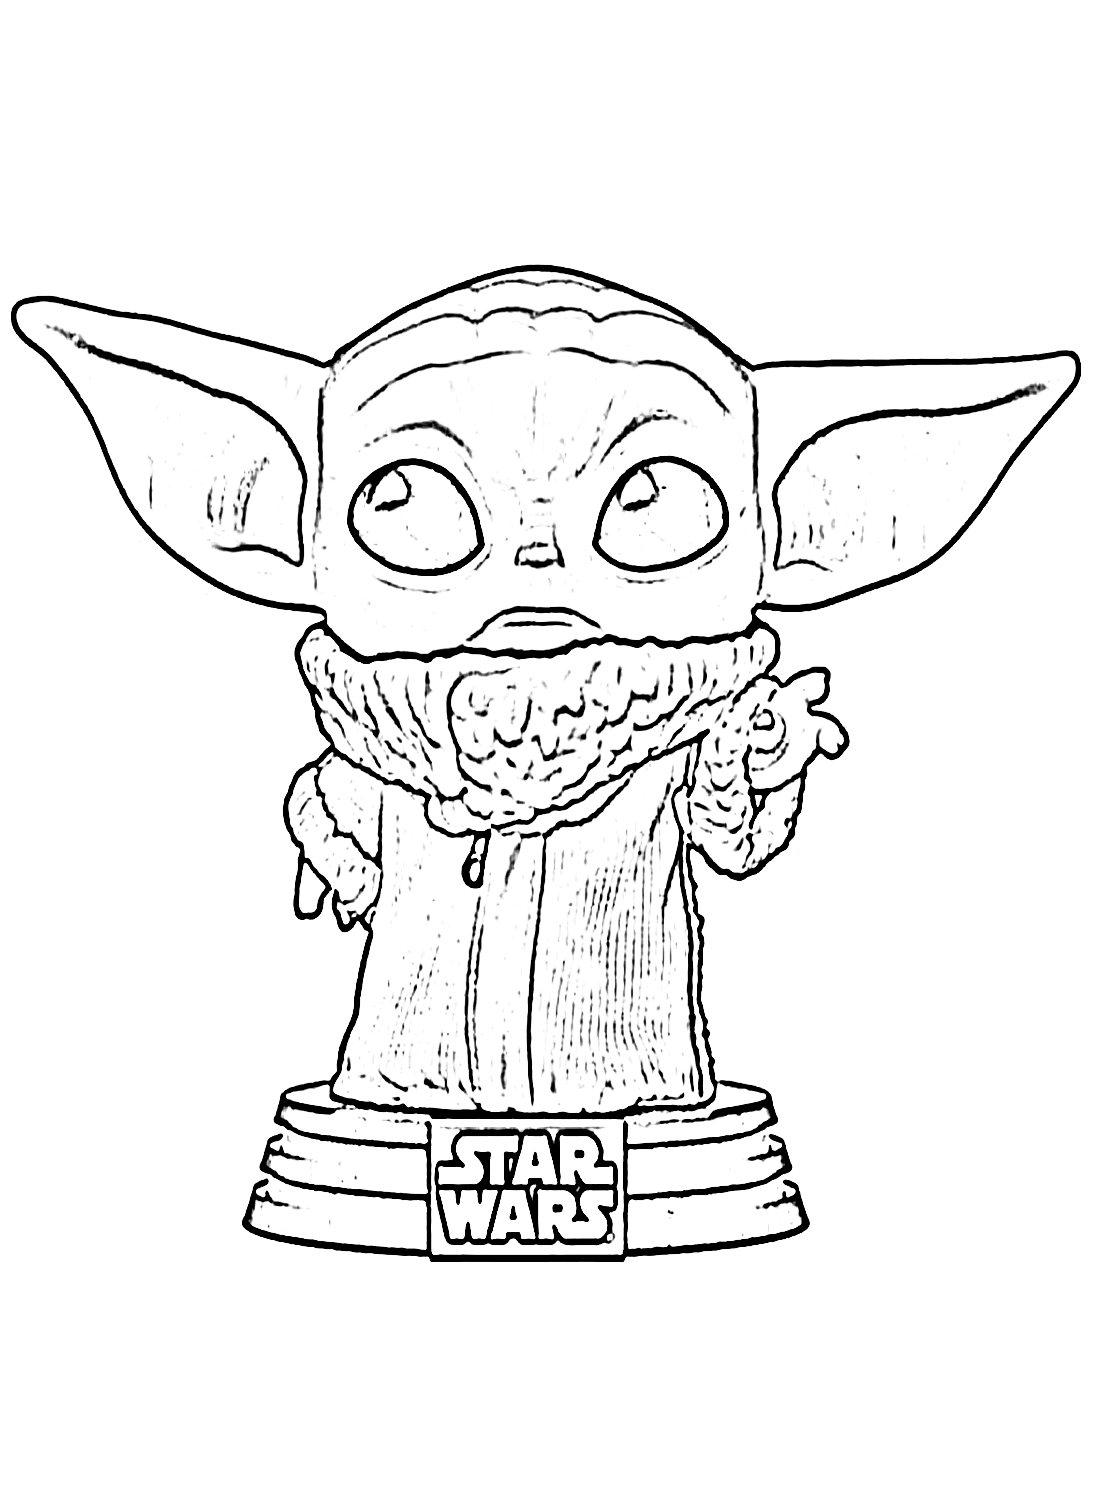 Yoda Trophy Coloring Page